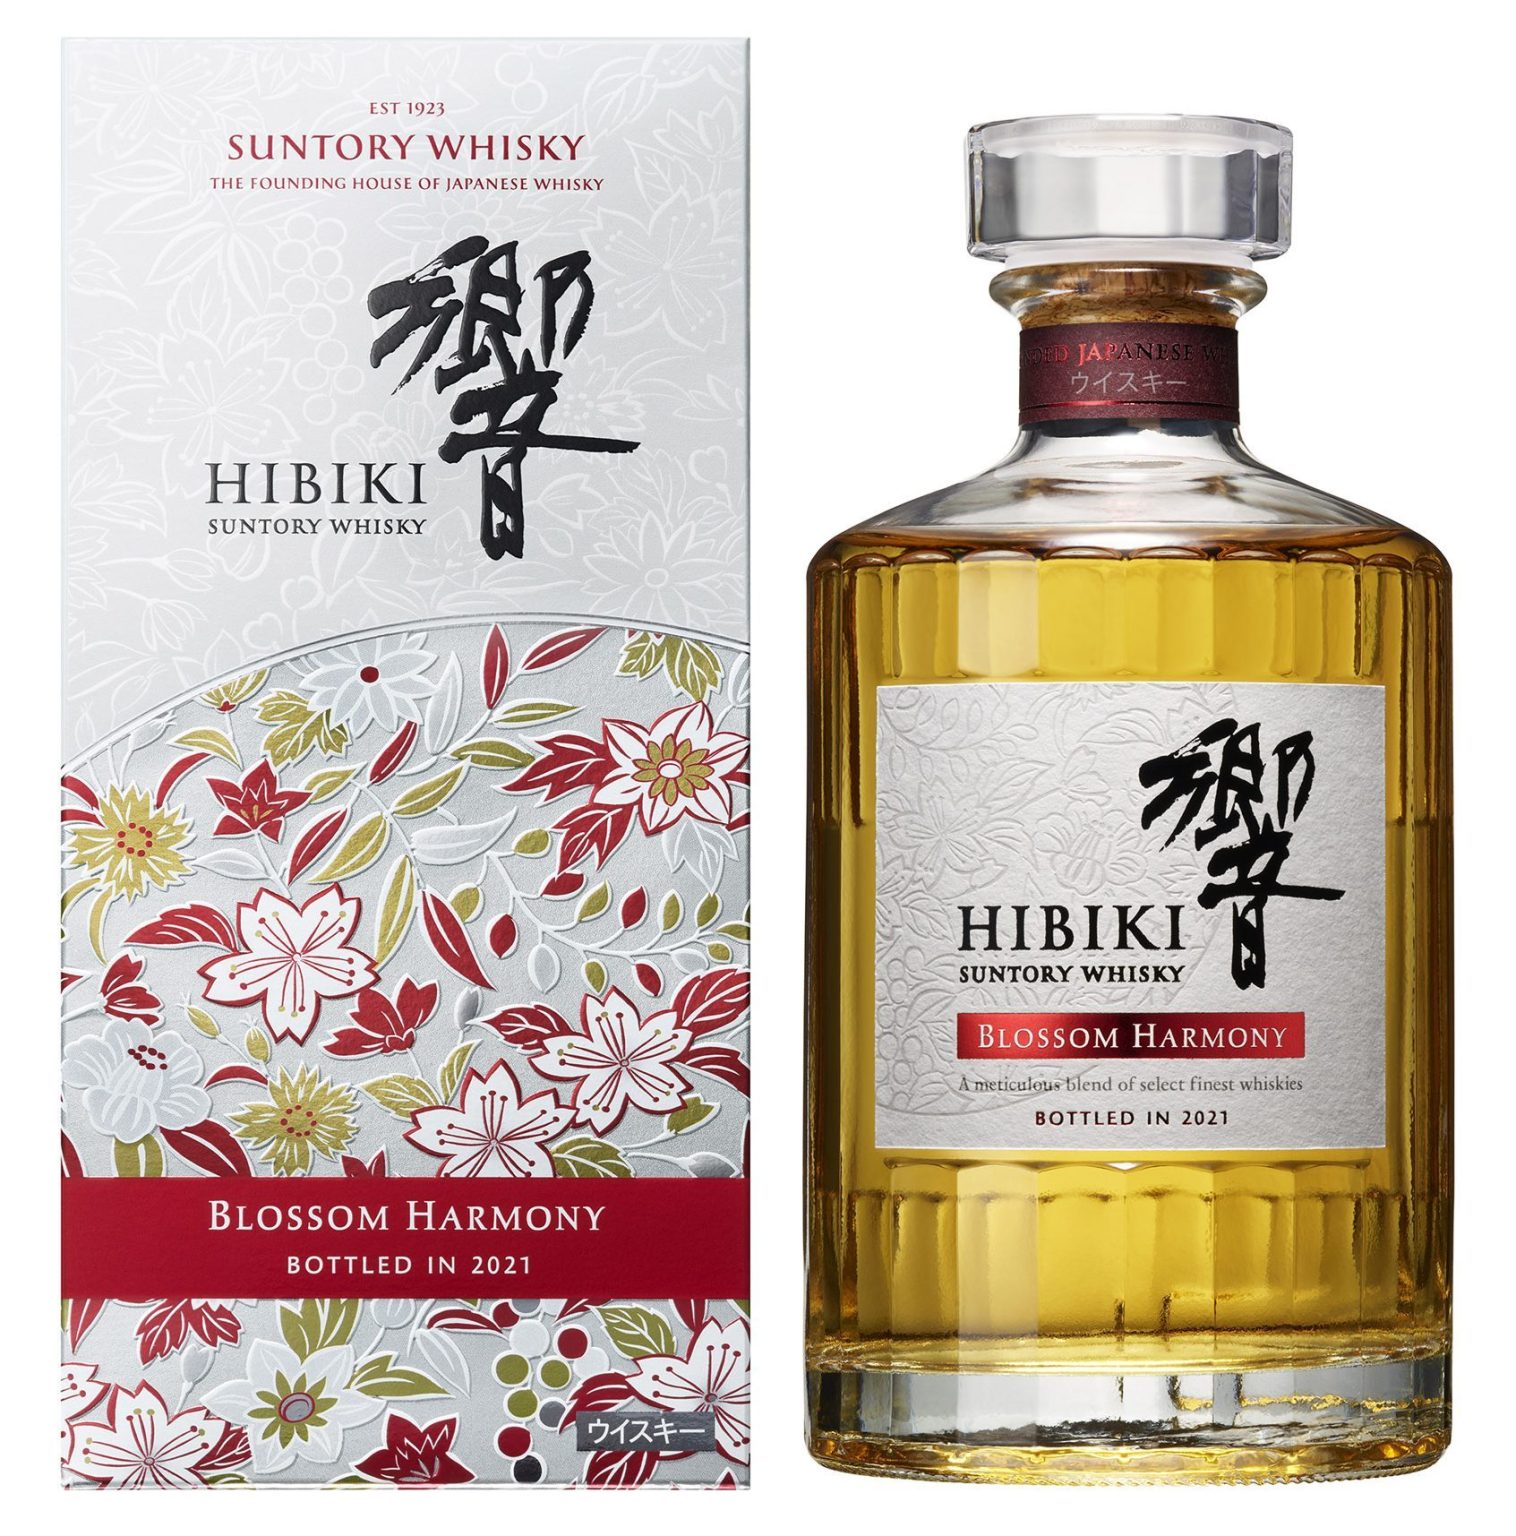 Blossom Harmony Hibiki is Japan’s newest musttry whisky Japan Today